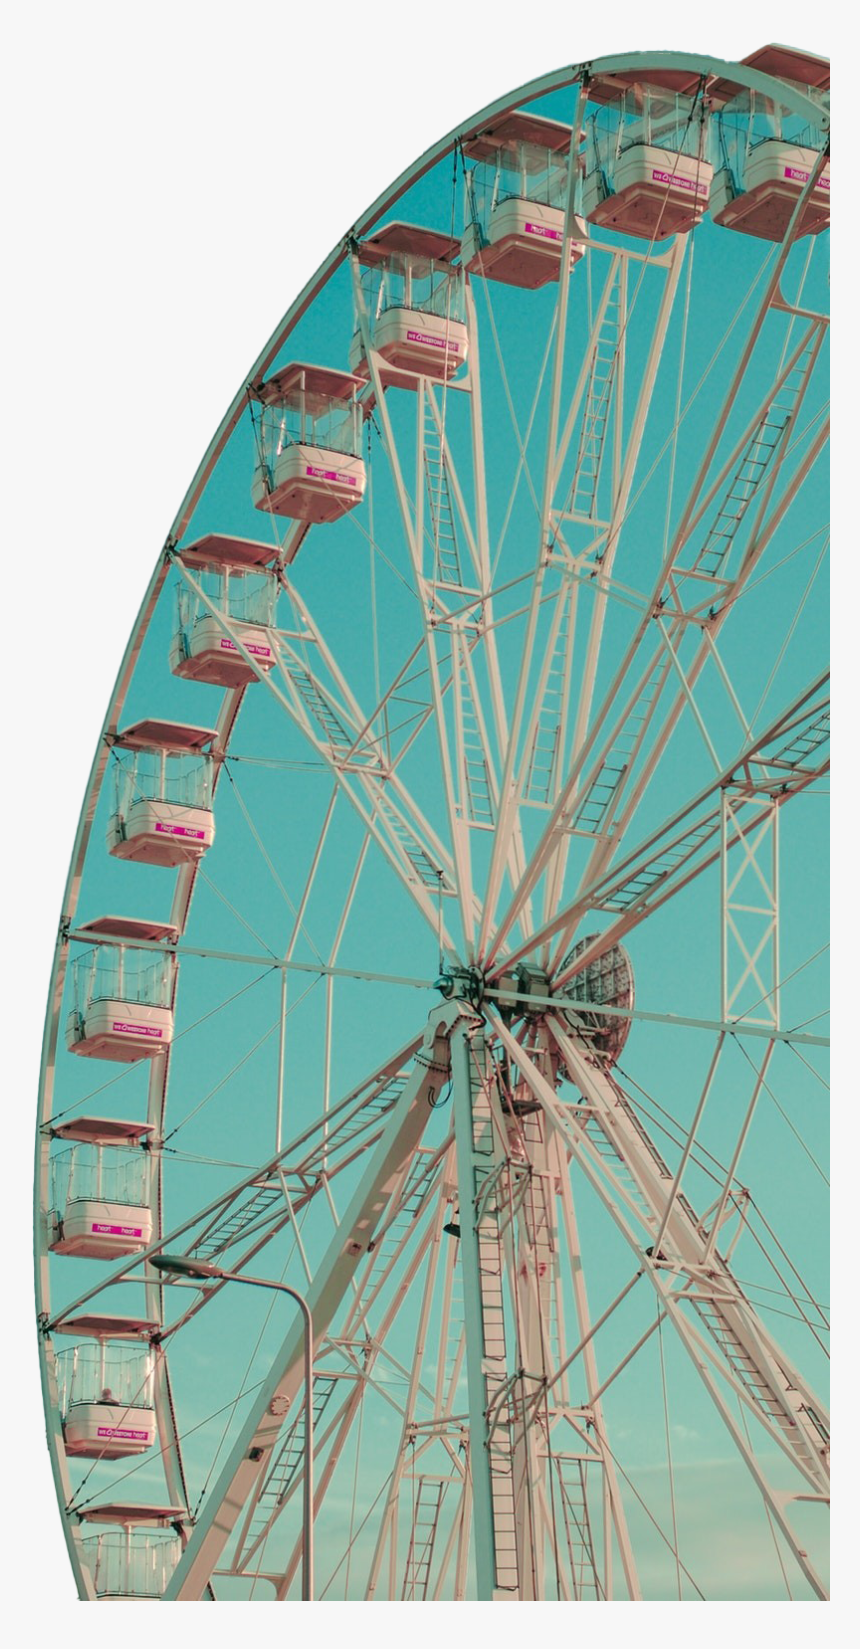 Wheel Ferris Png Transparent Image - Photograph, Png Download, Free Download